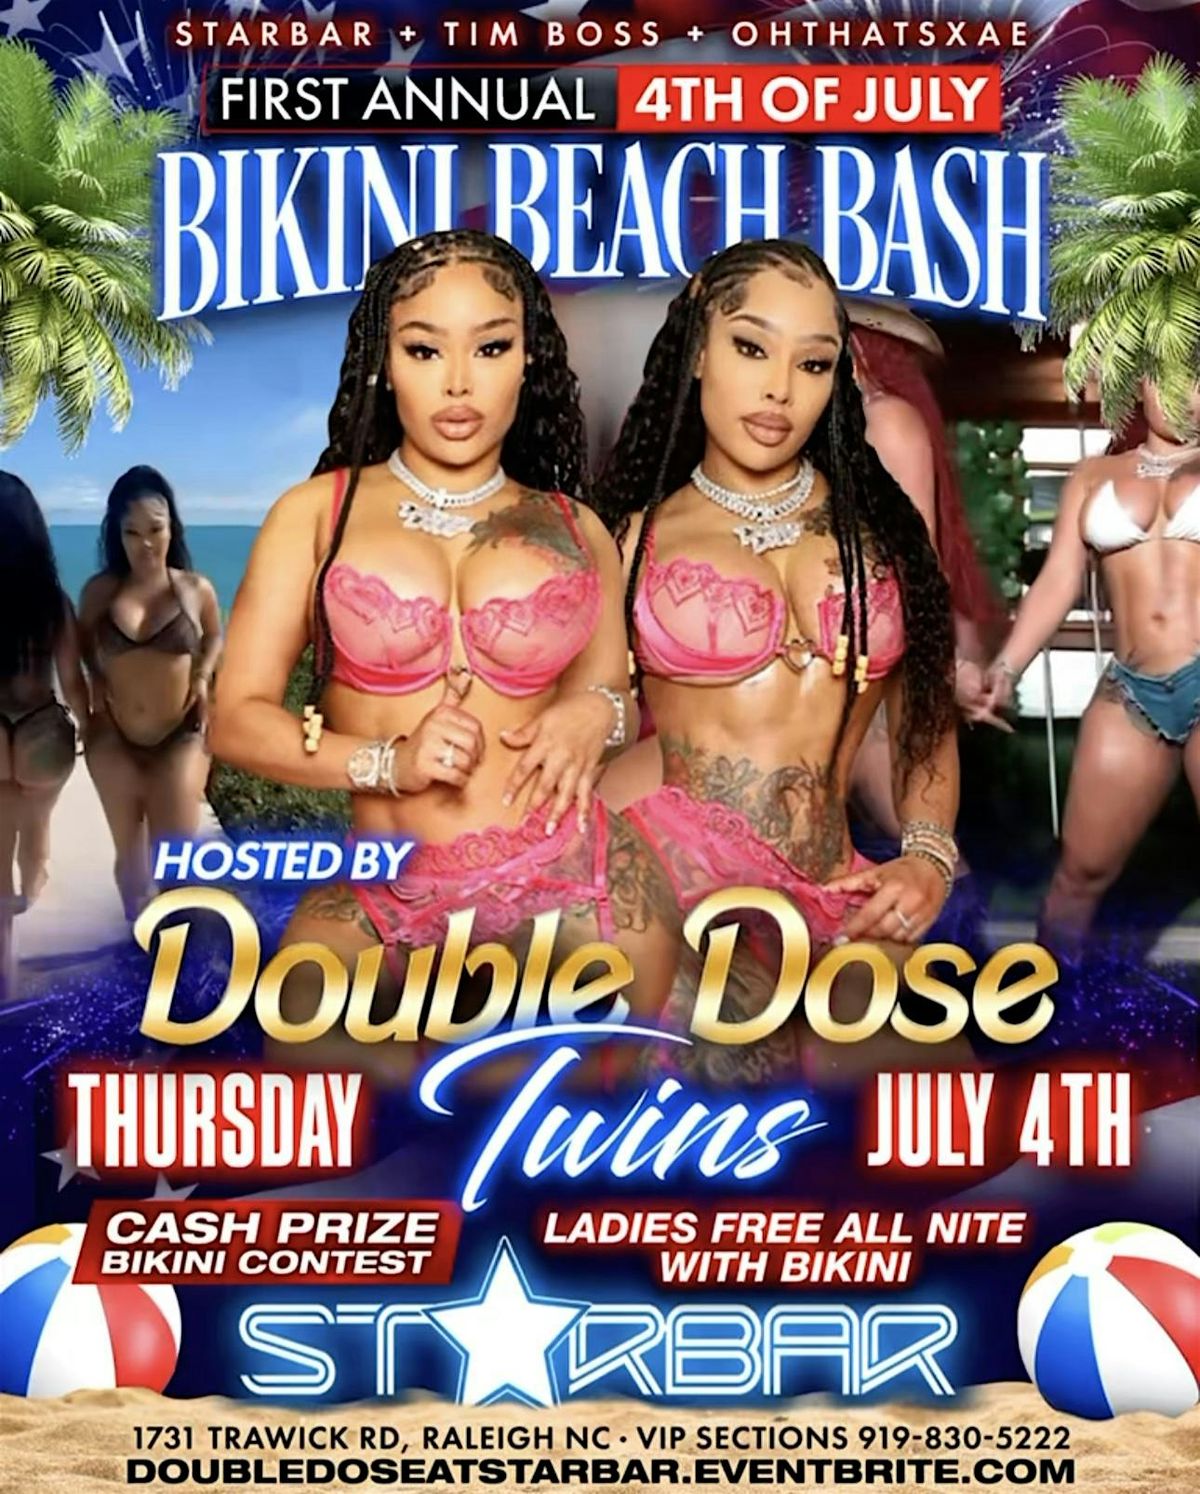 Double dose twins 4th of July take over